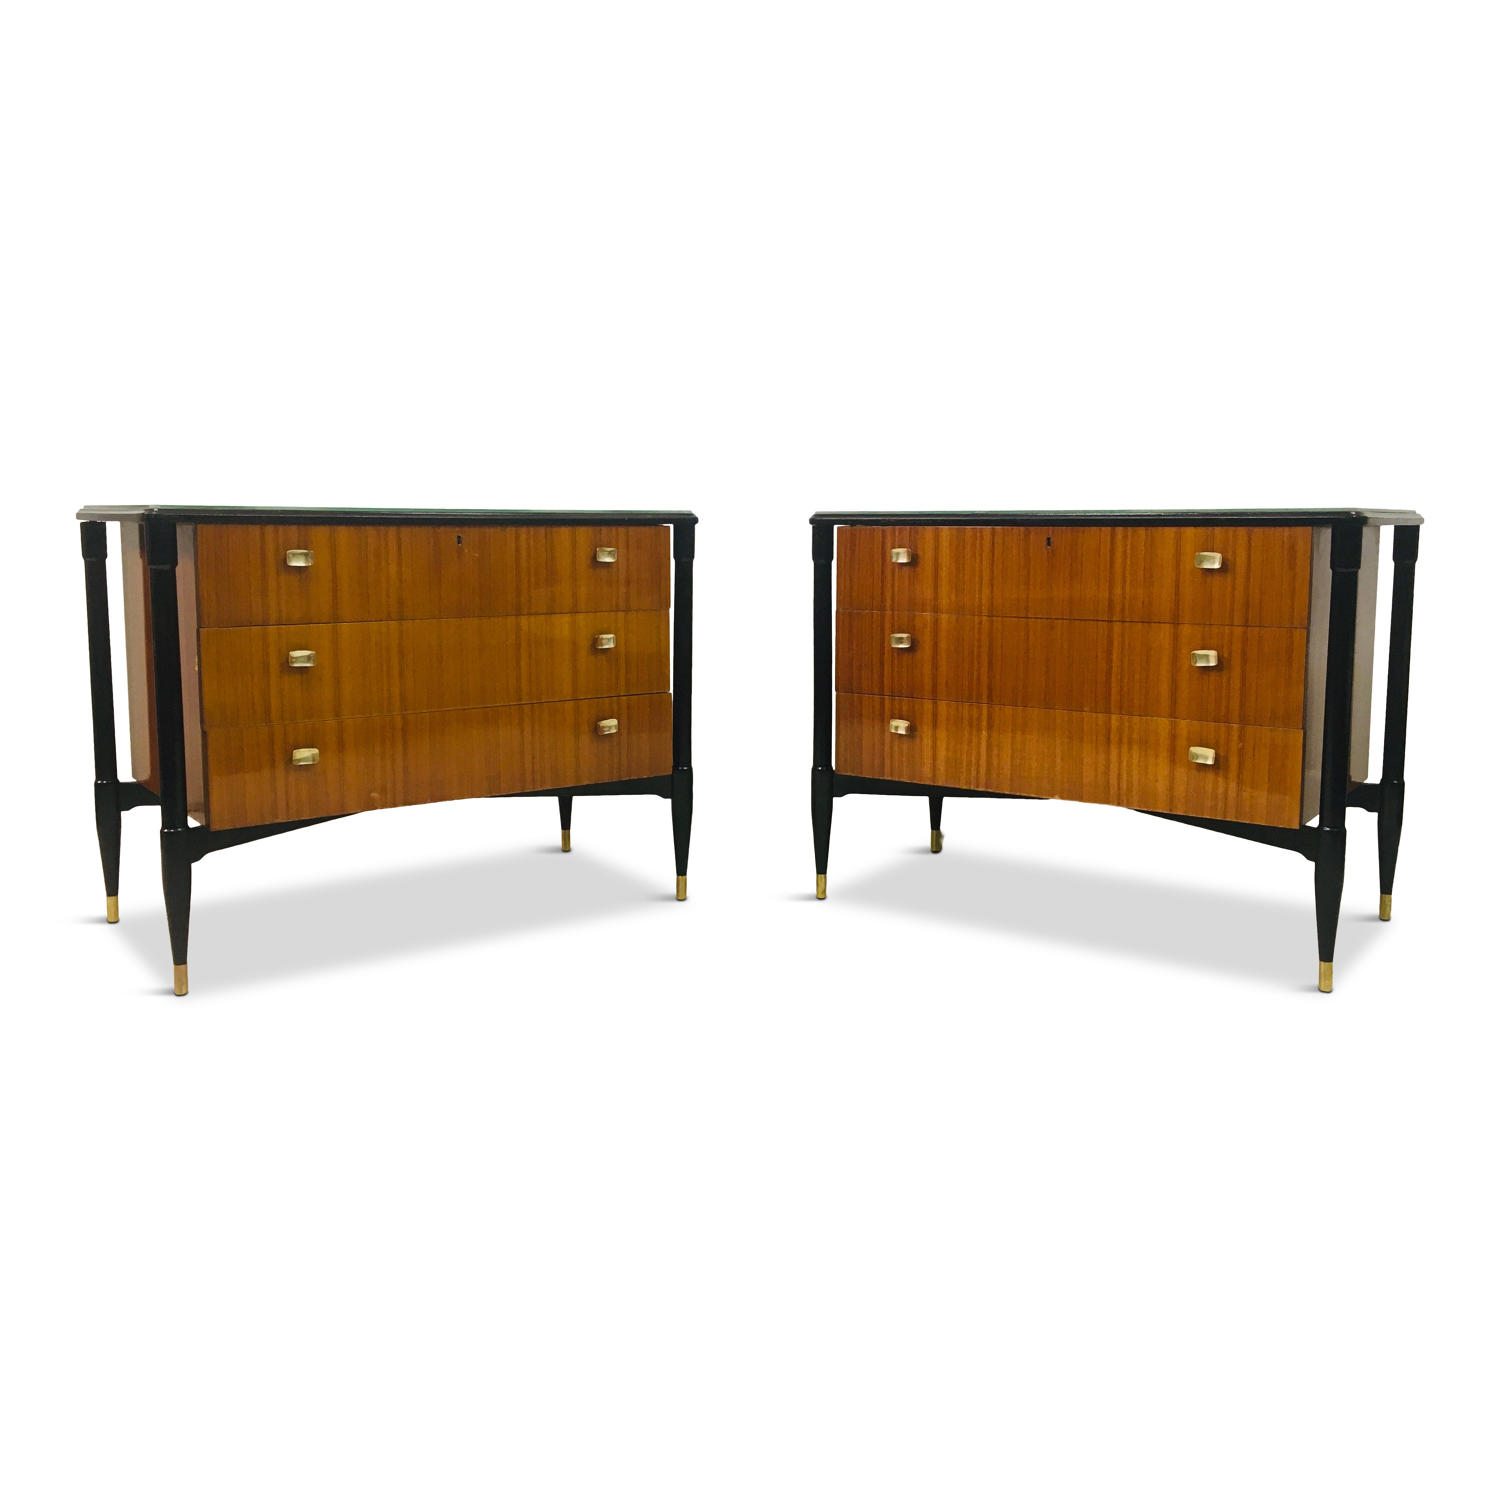 A pair of 1950s Italian mahogany and black chest of drawers